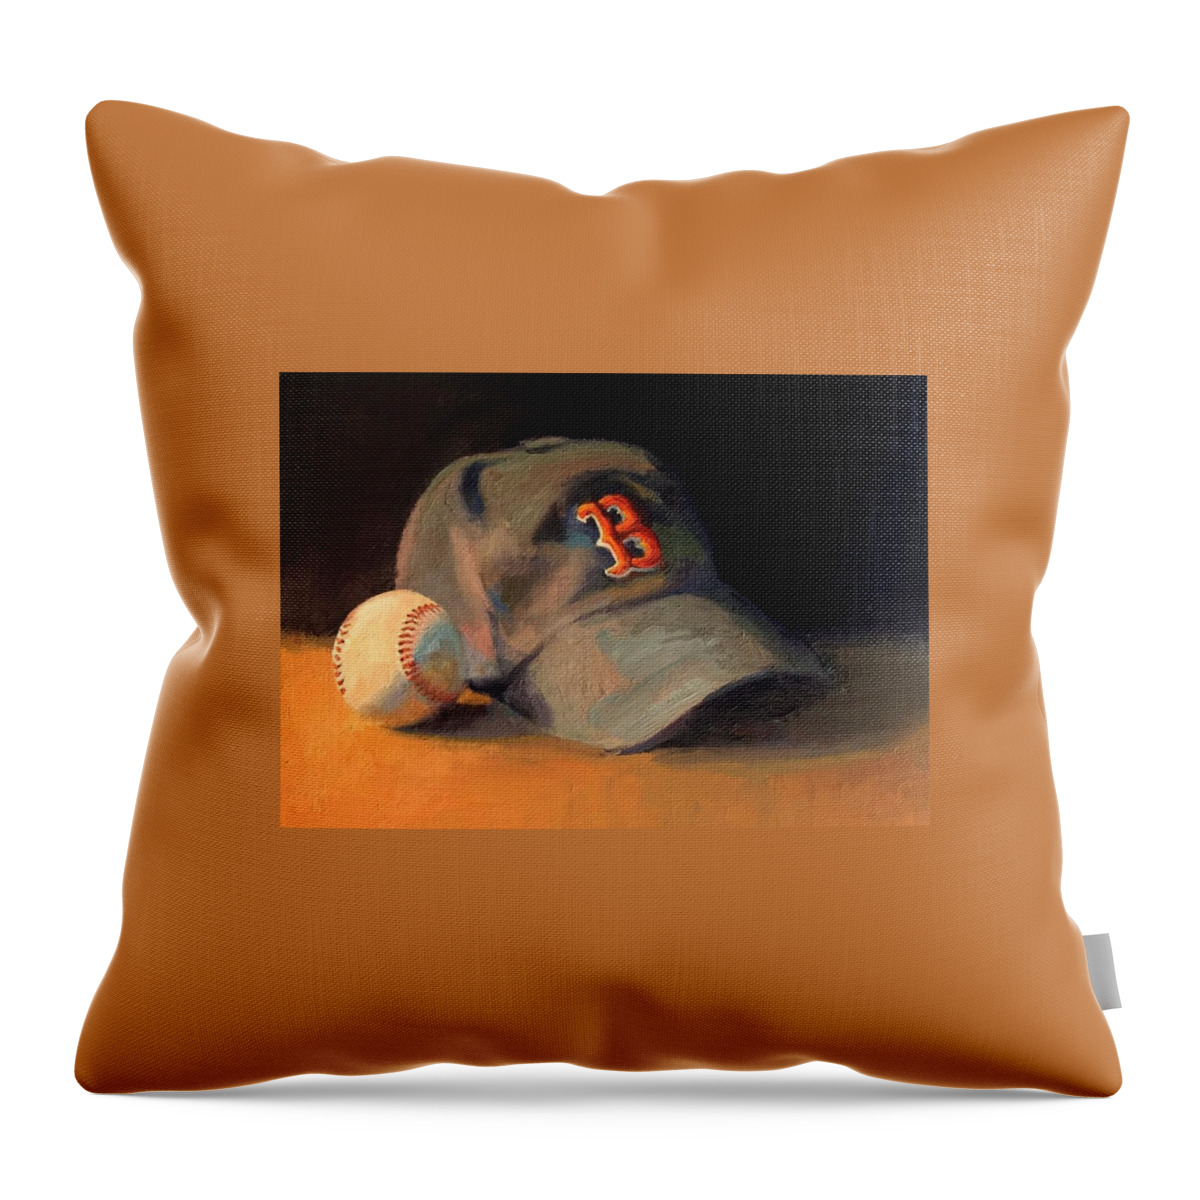 Red Sox Throw Pillow featuring the painting Boston Baseball Fan by Dianne Panarelli Miller